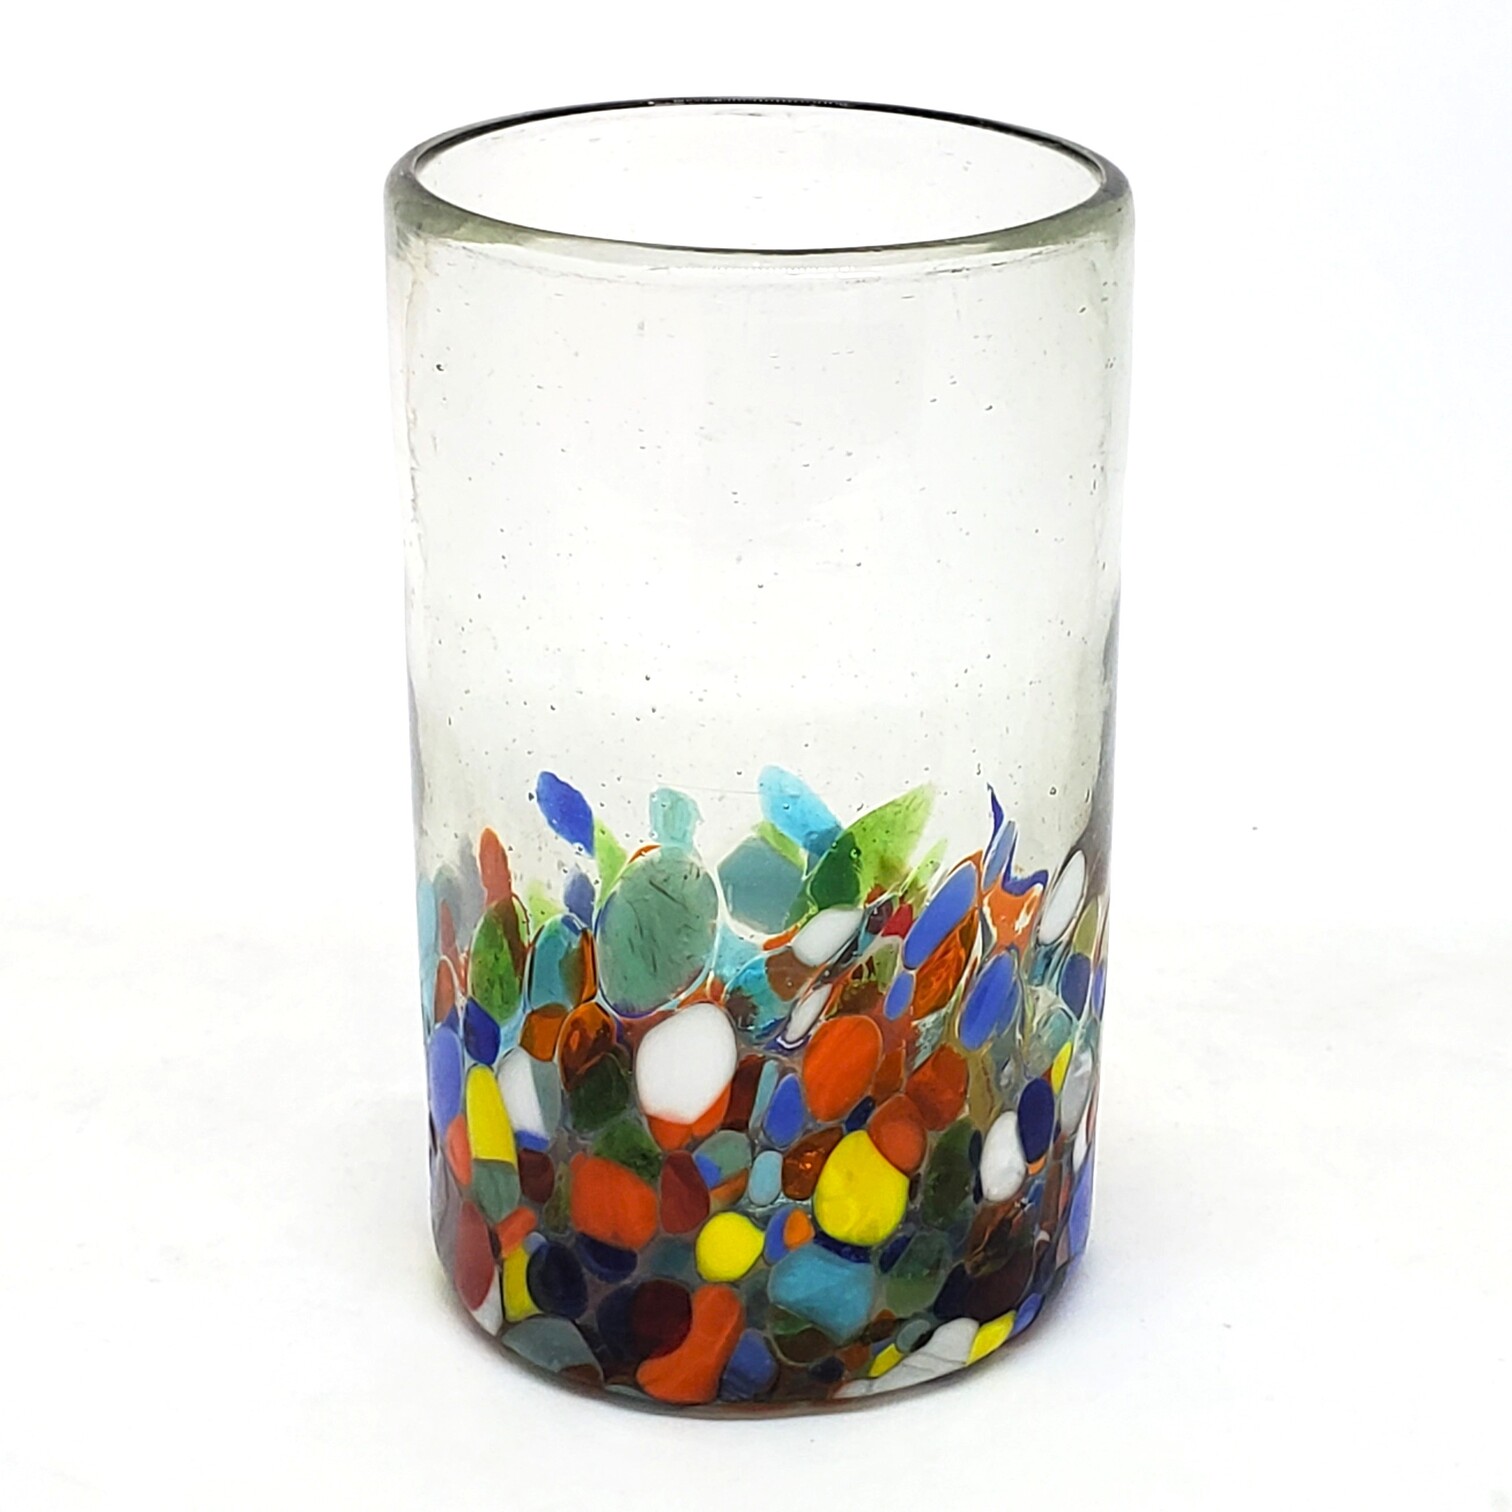 Confetti Glassware / Clear & Confetti 14 oz Drinking Glasses (set of 6) / Our Clear & Confetti drinking glasses combine the best of two worlds: clear, thick, sturdy handcrafted glass on top, meets the colorful, festive, confetti bottom! These glasses will sure be a standout in any table setting or as a fabulous gift for your loved ones. Crafted one by one by skilled artisans in Tonala, Mexico, each glass is different from the next making them unique works of art. You'll be amazed at how they make having a simple glass of water a happier experience. Made from eco-friendly recycled glass.